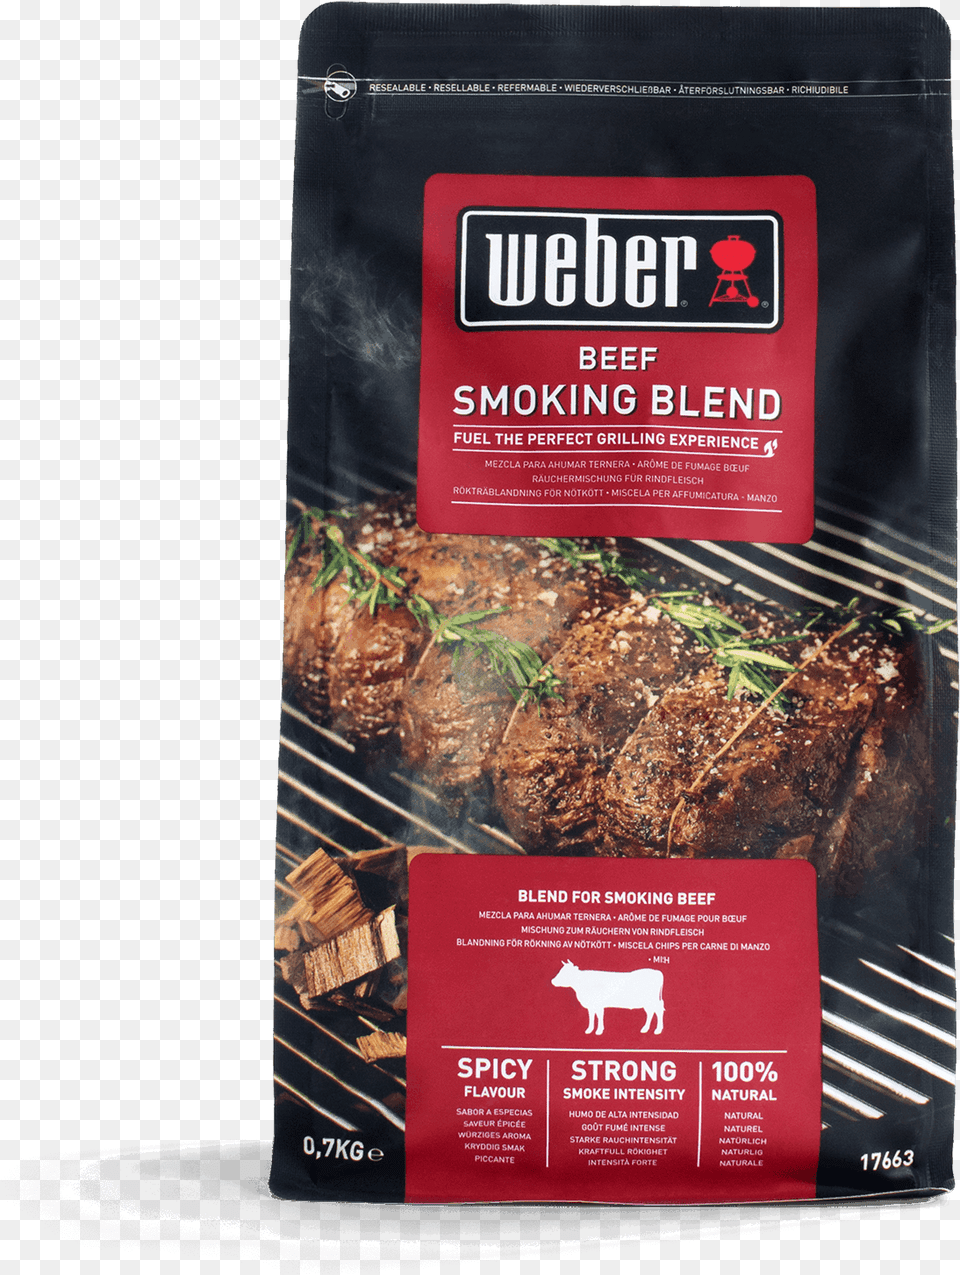 Wood Chip Blend Beef View Weber Grill, Bbq, Cooking, Food, Grilling Png Image